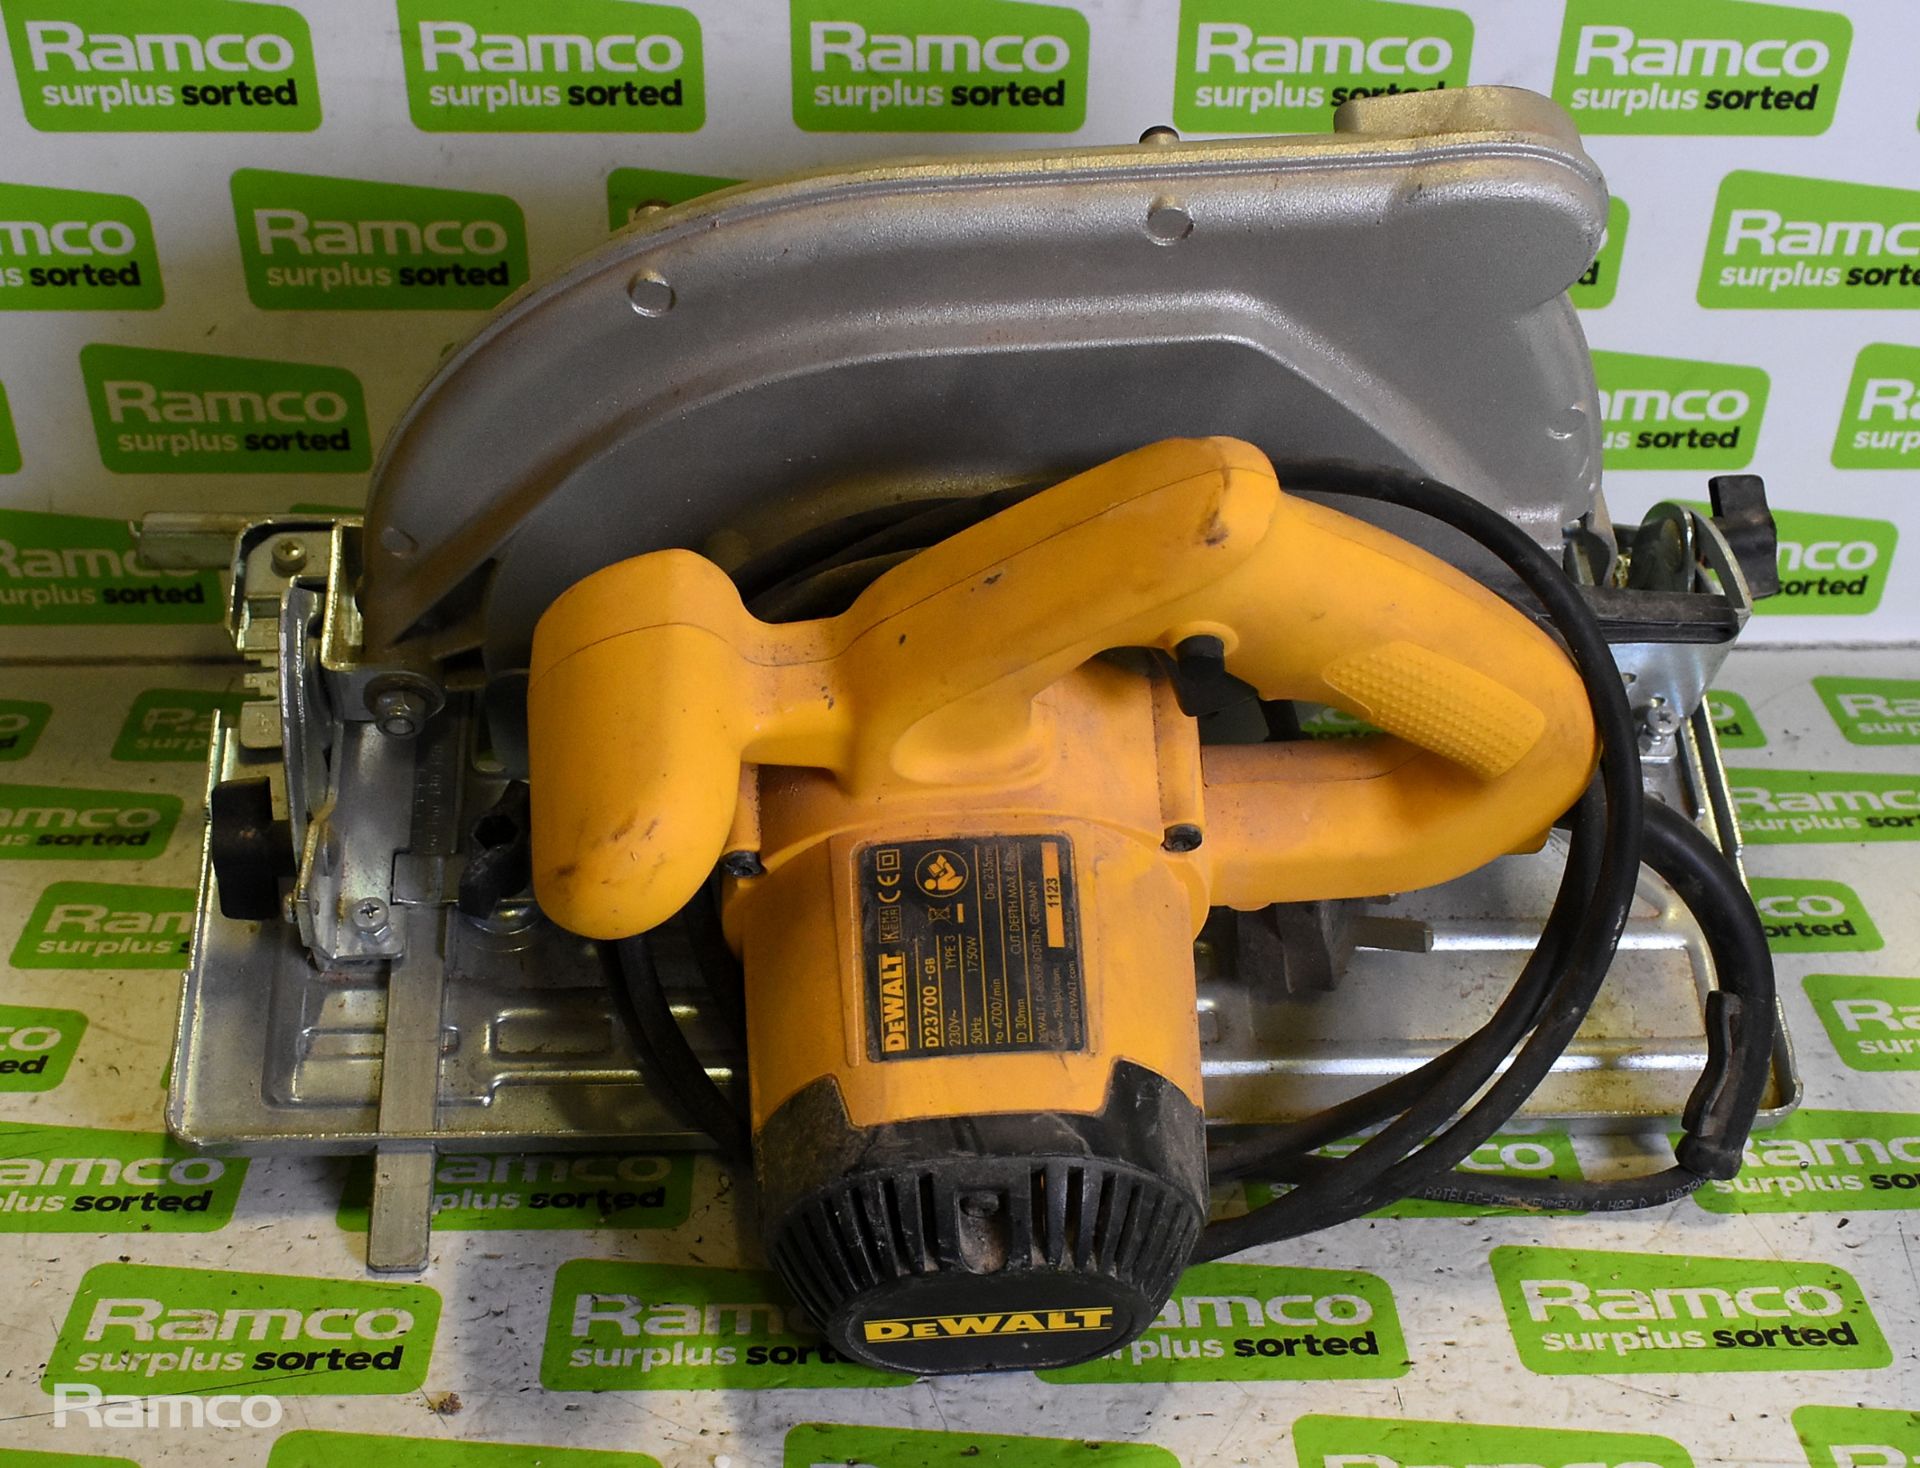 Electrical tools - Dewalt router with case, large circular saw, cordless 18V circular saw - Image 4 of 22